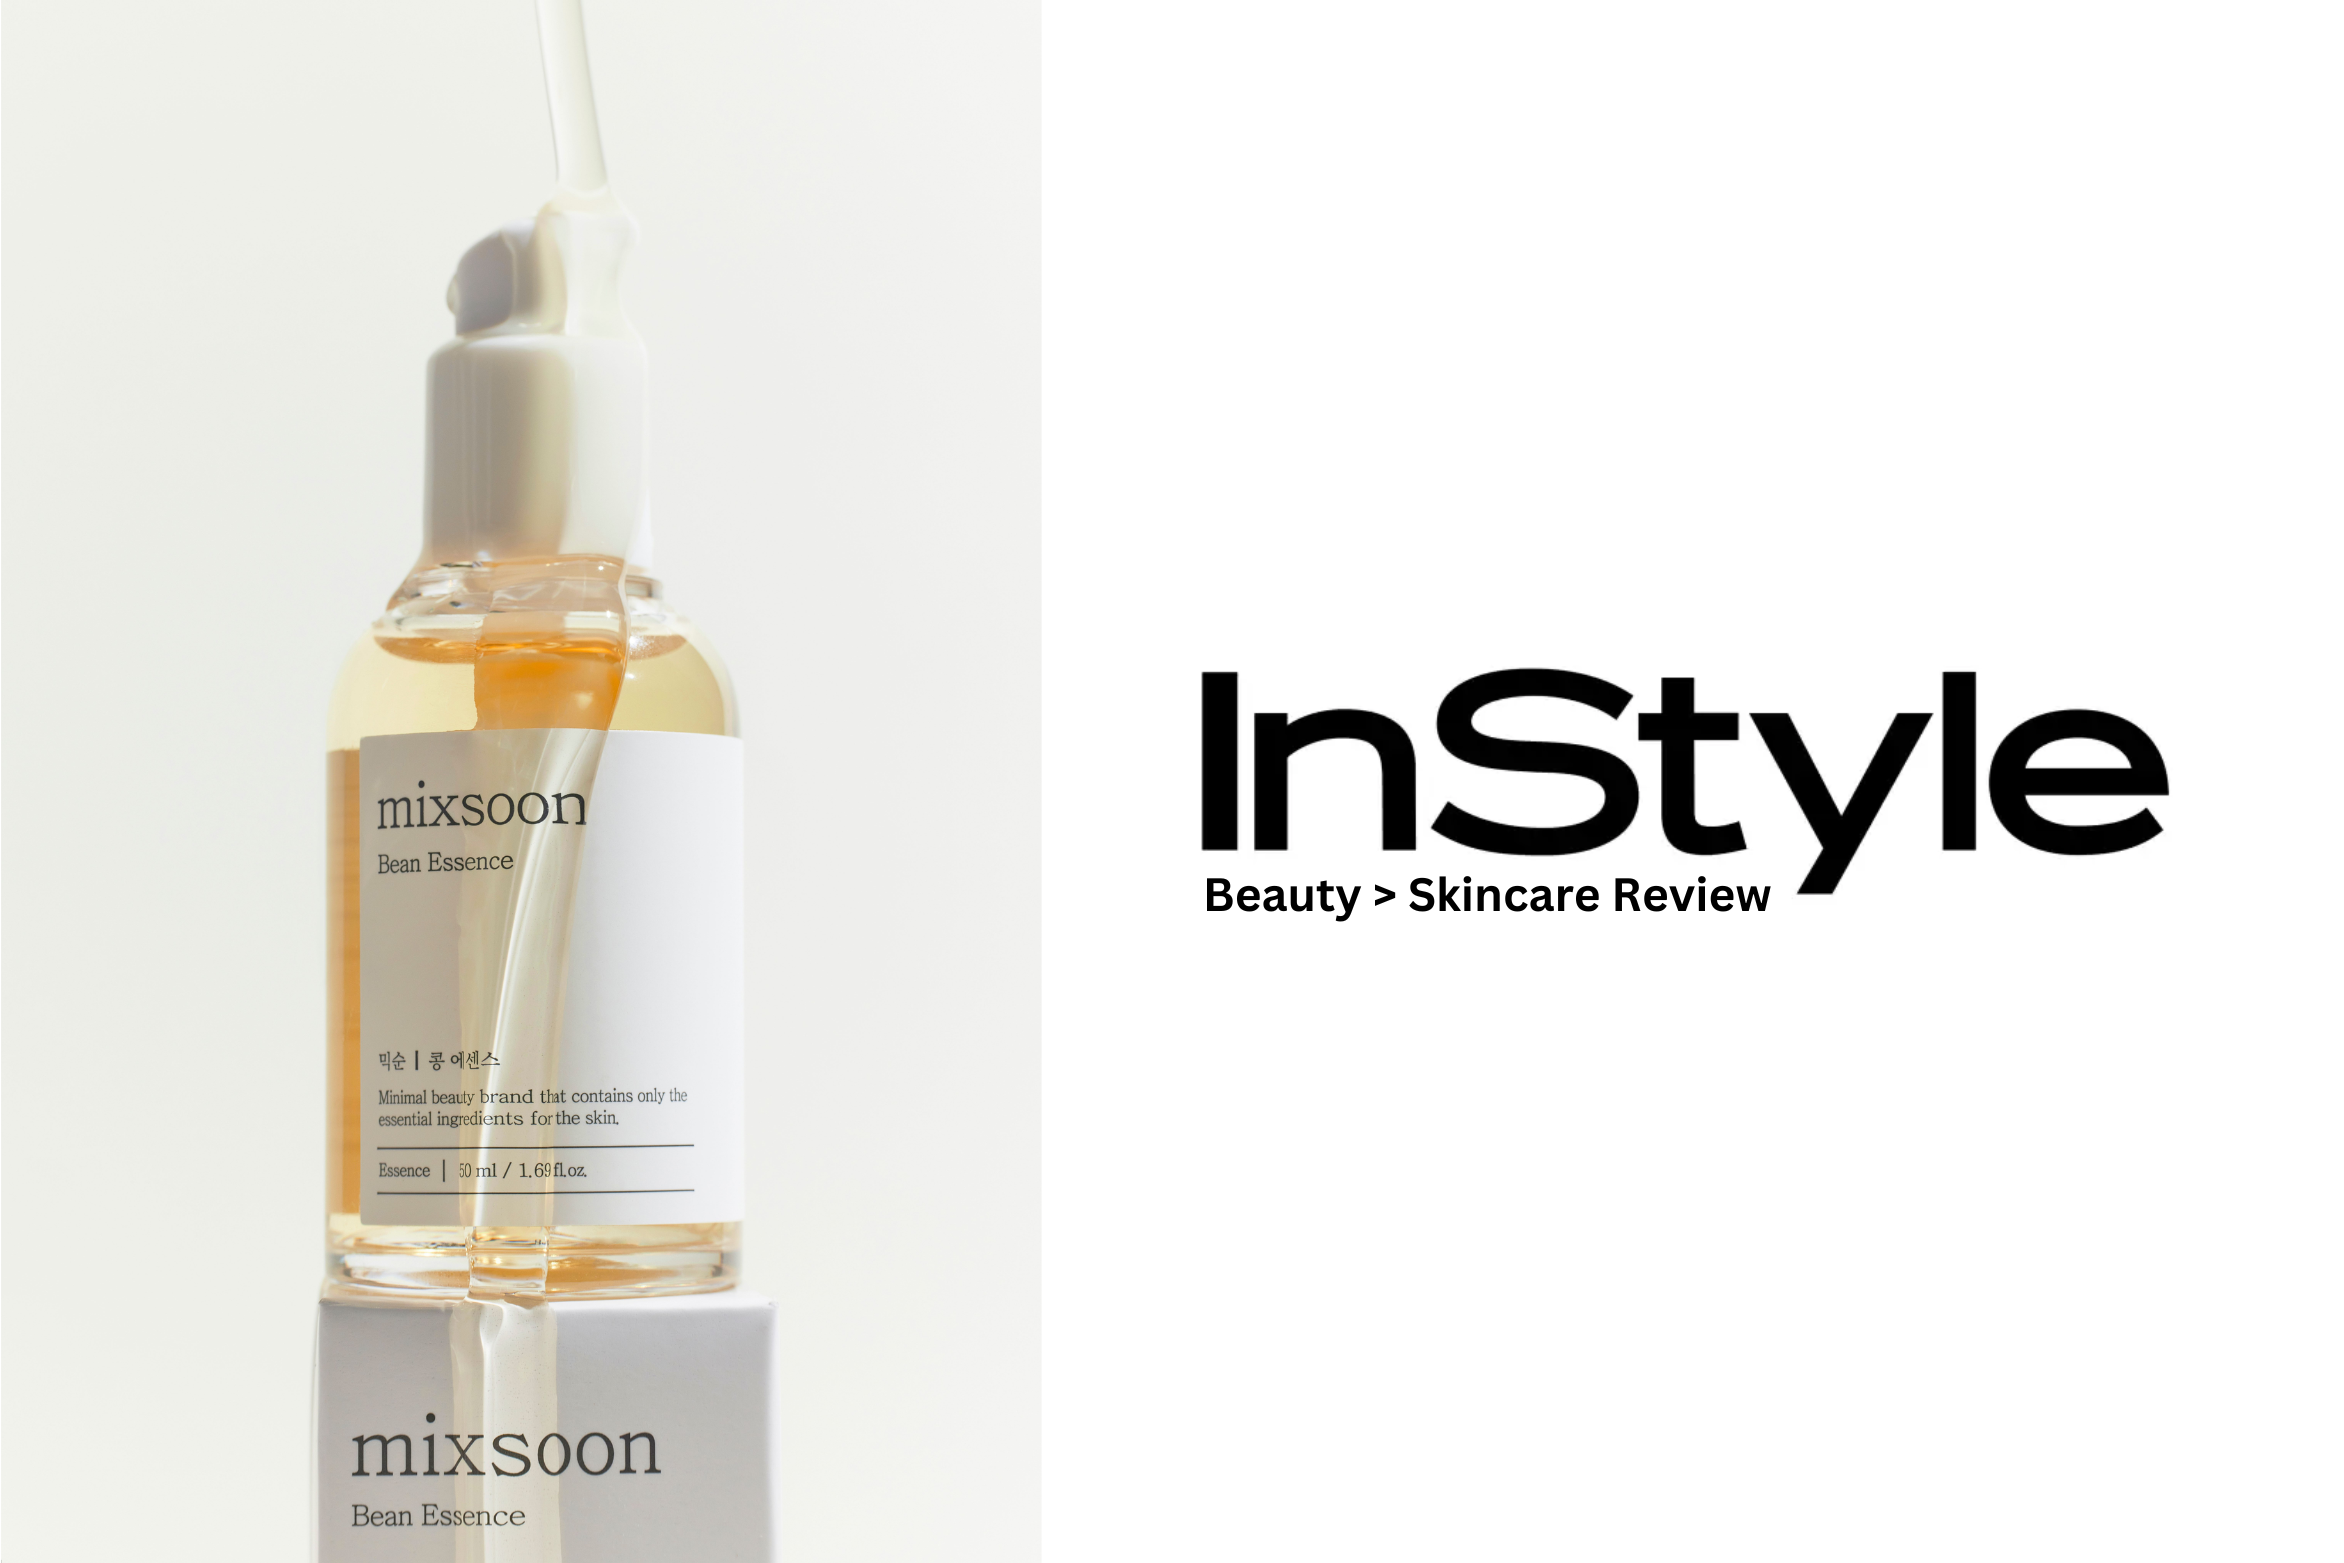 [mixsoon Collection] Bean Esssence Review by InStyle